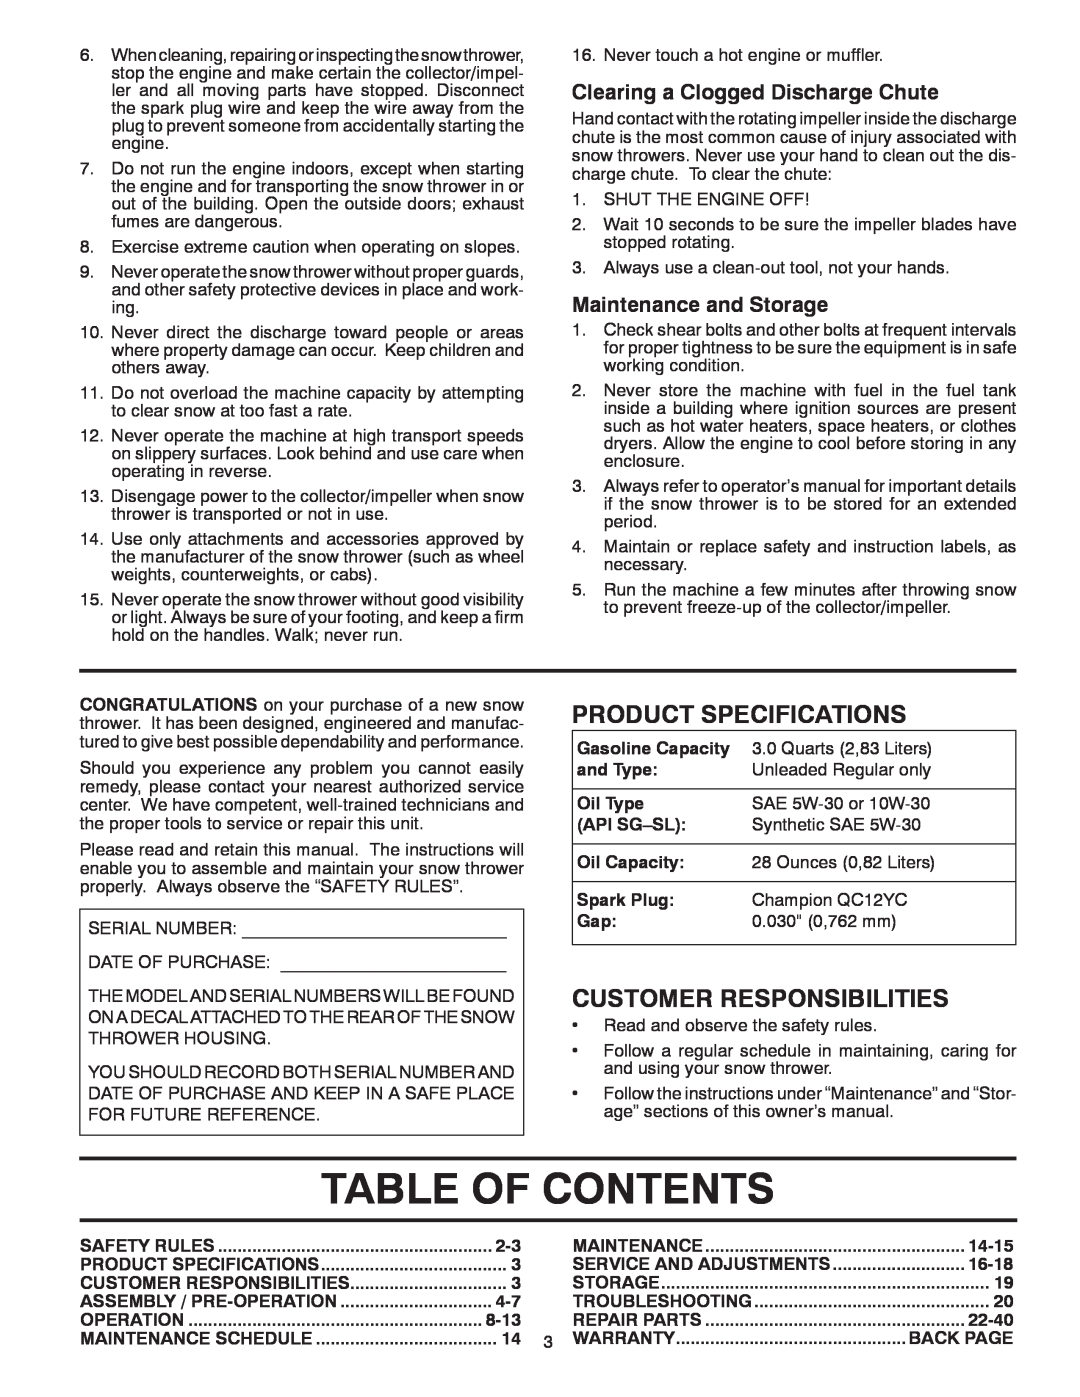 Poulan 96192003503 Table Of Contents, Product Specifications, Customer Responsibilities, Maintenance and Storage, and Type 